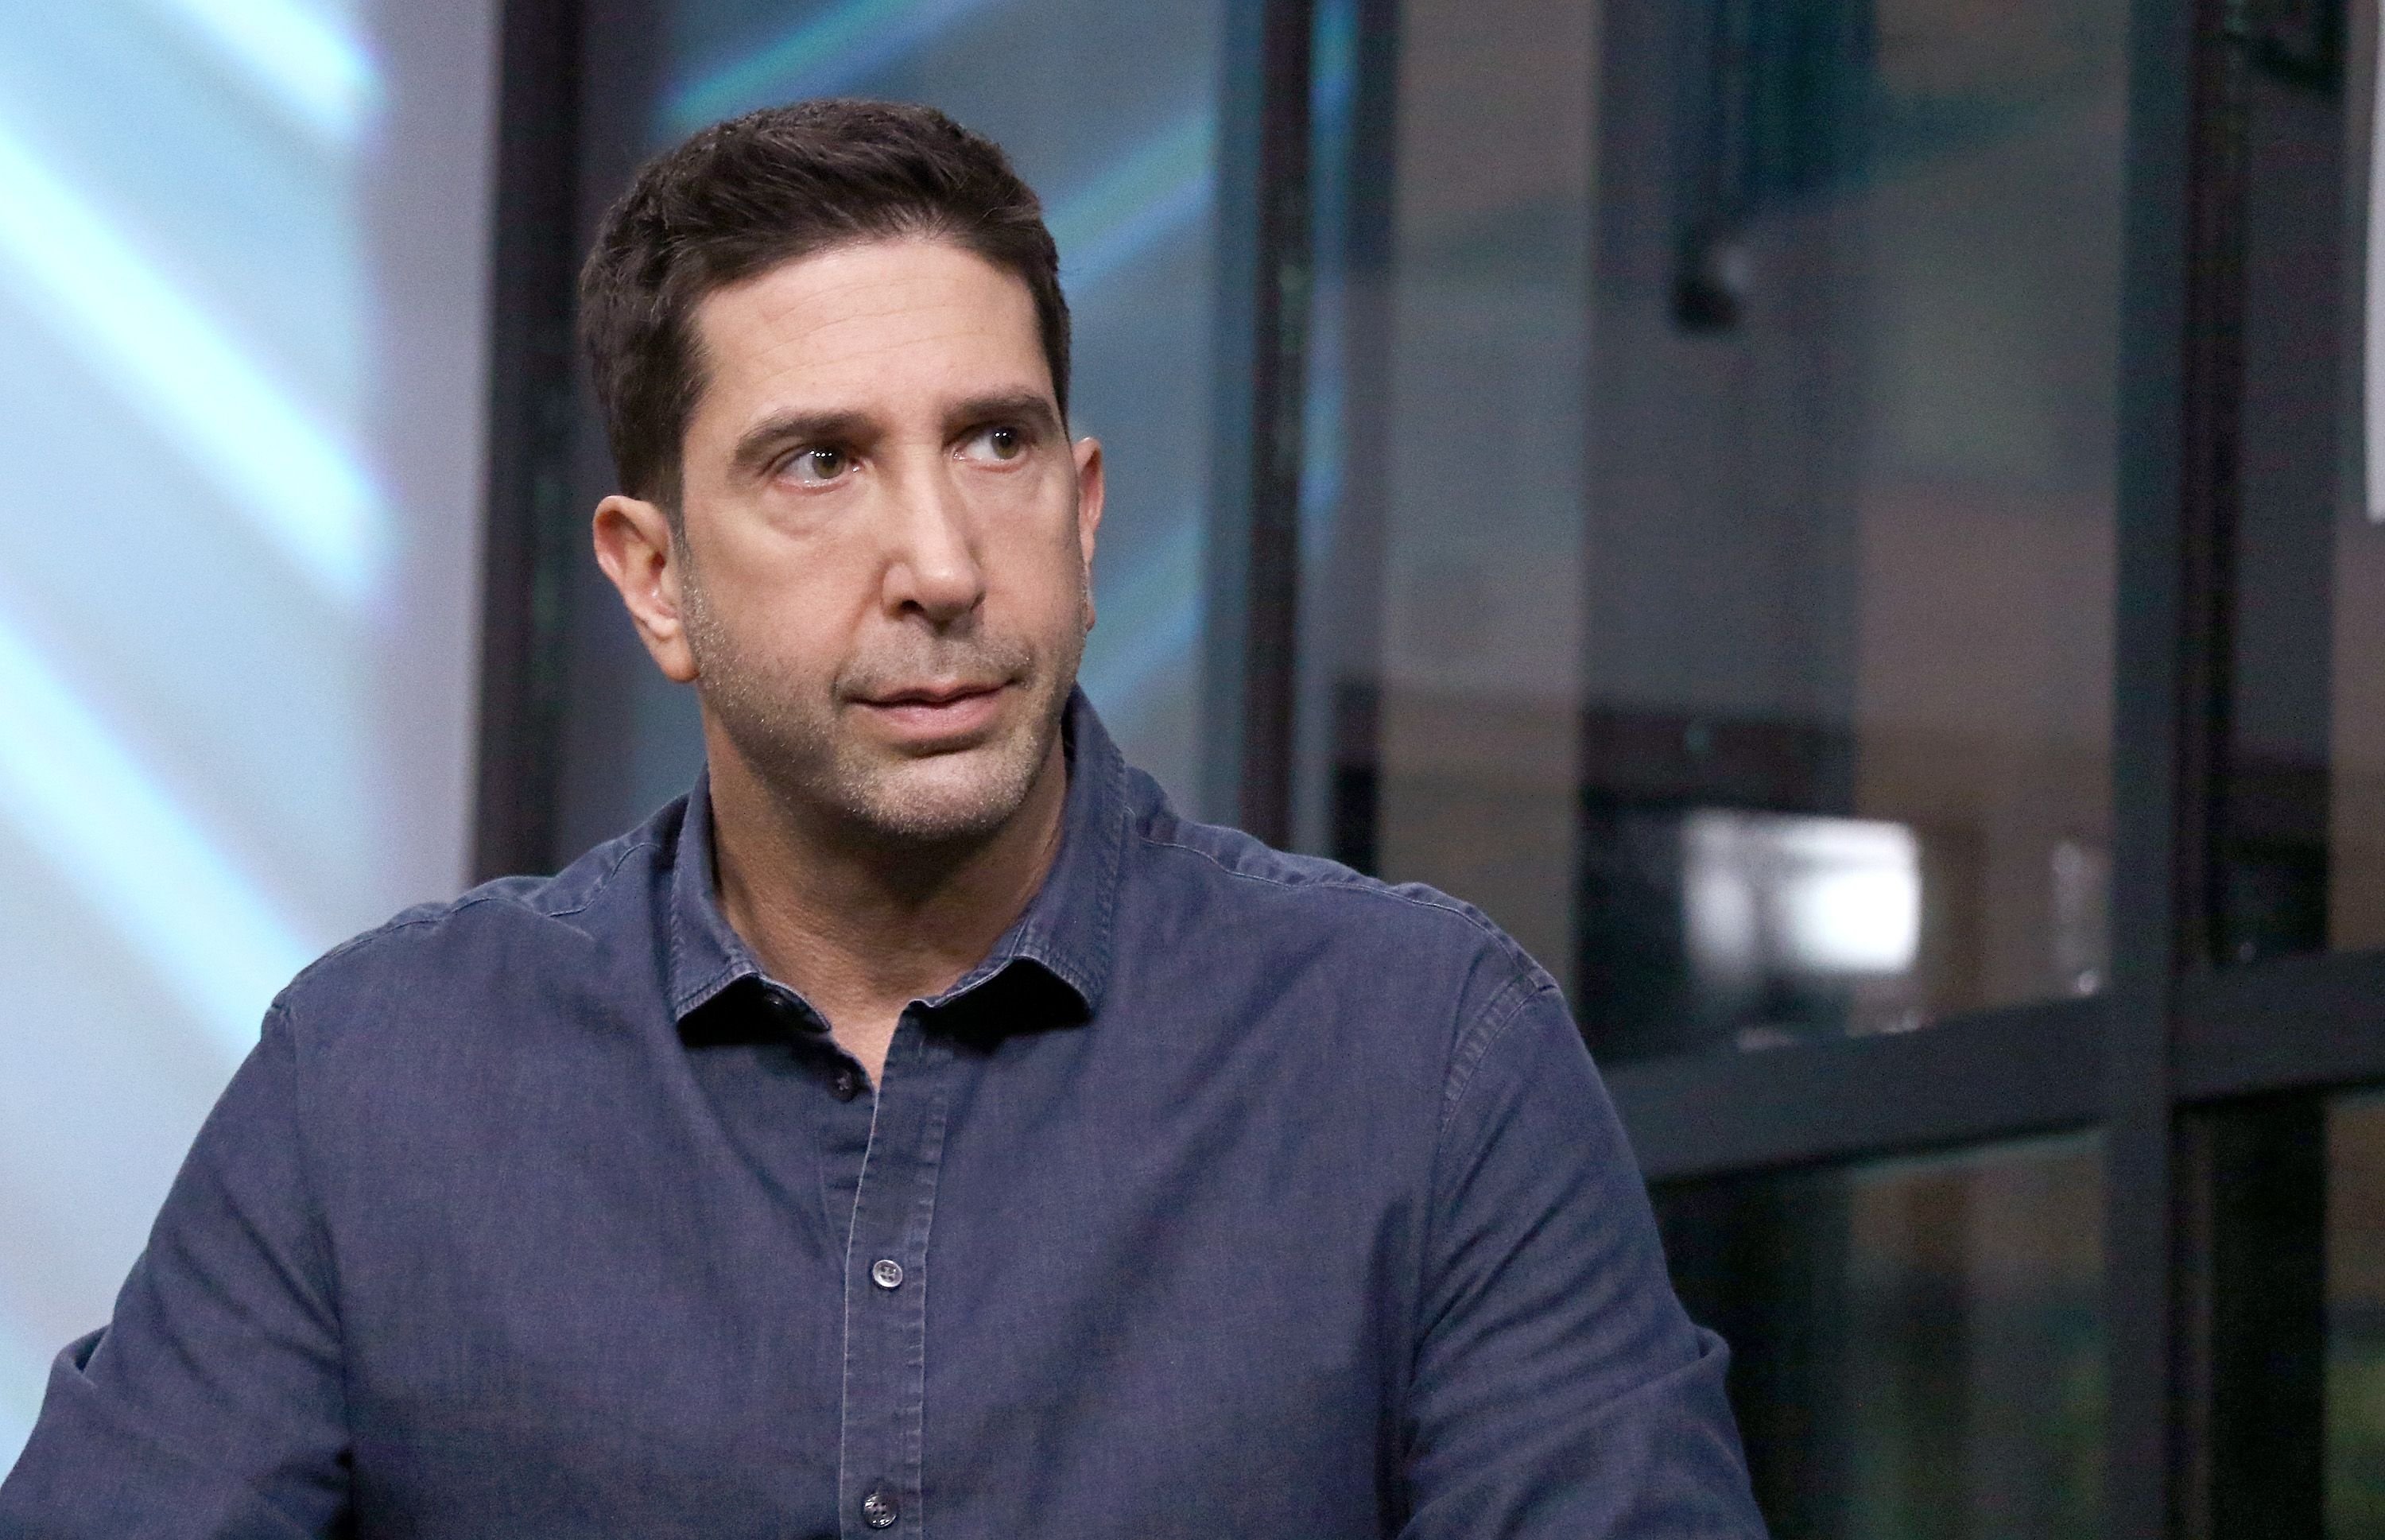 David Schwimmer at the Build Series discussion of #ThatsHarassment campaign in 2018 in New York City | Source: Getty Images